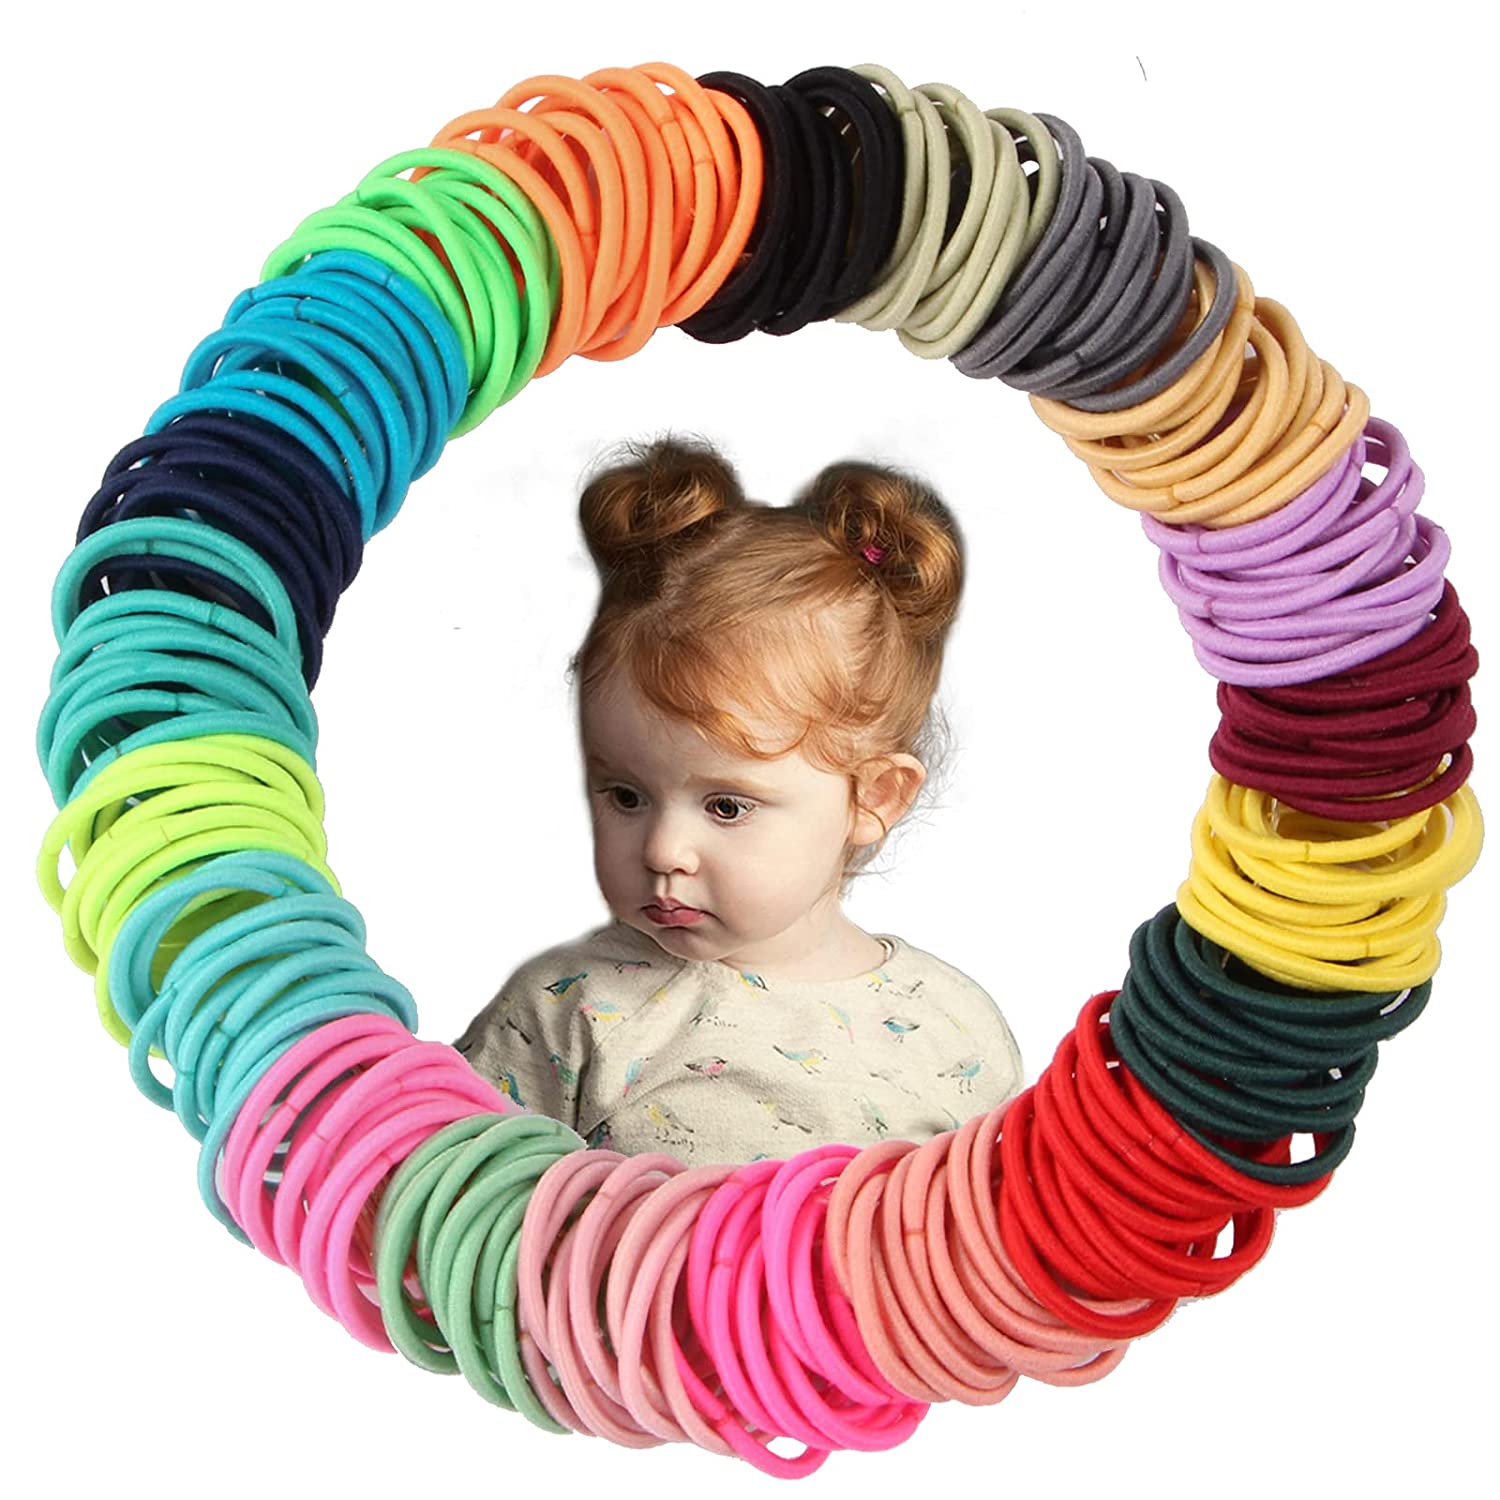 NOGIS 200PCS Baby Hair Ties for Girls, Toddler Hair Tie 2mm Thick , Small Hair Ties Multicolor Elastic Hair Bands, No Hair Damage Cute Hair Accessories Ponytail Holder for Kids - image 1 of 6